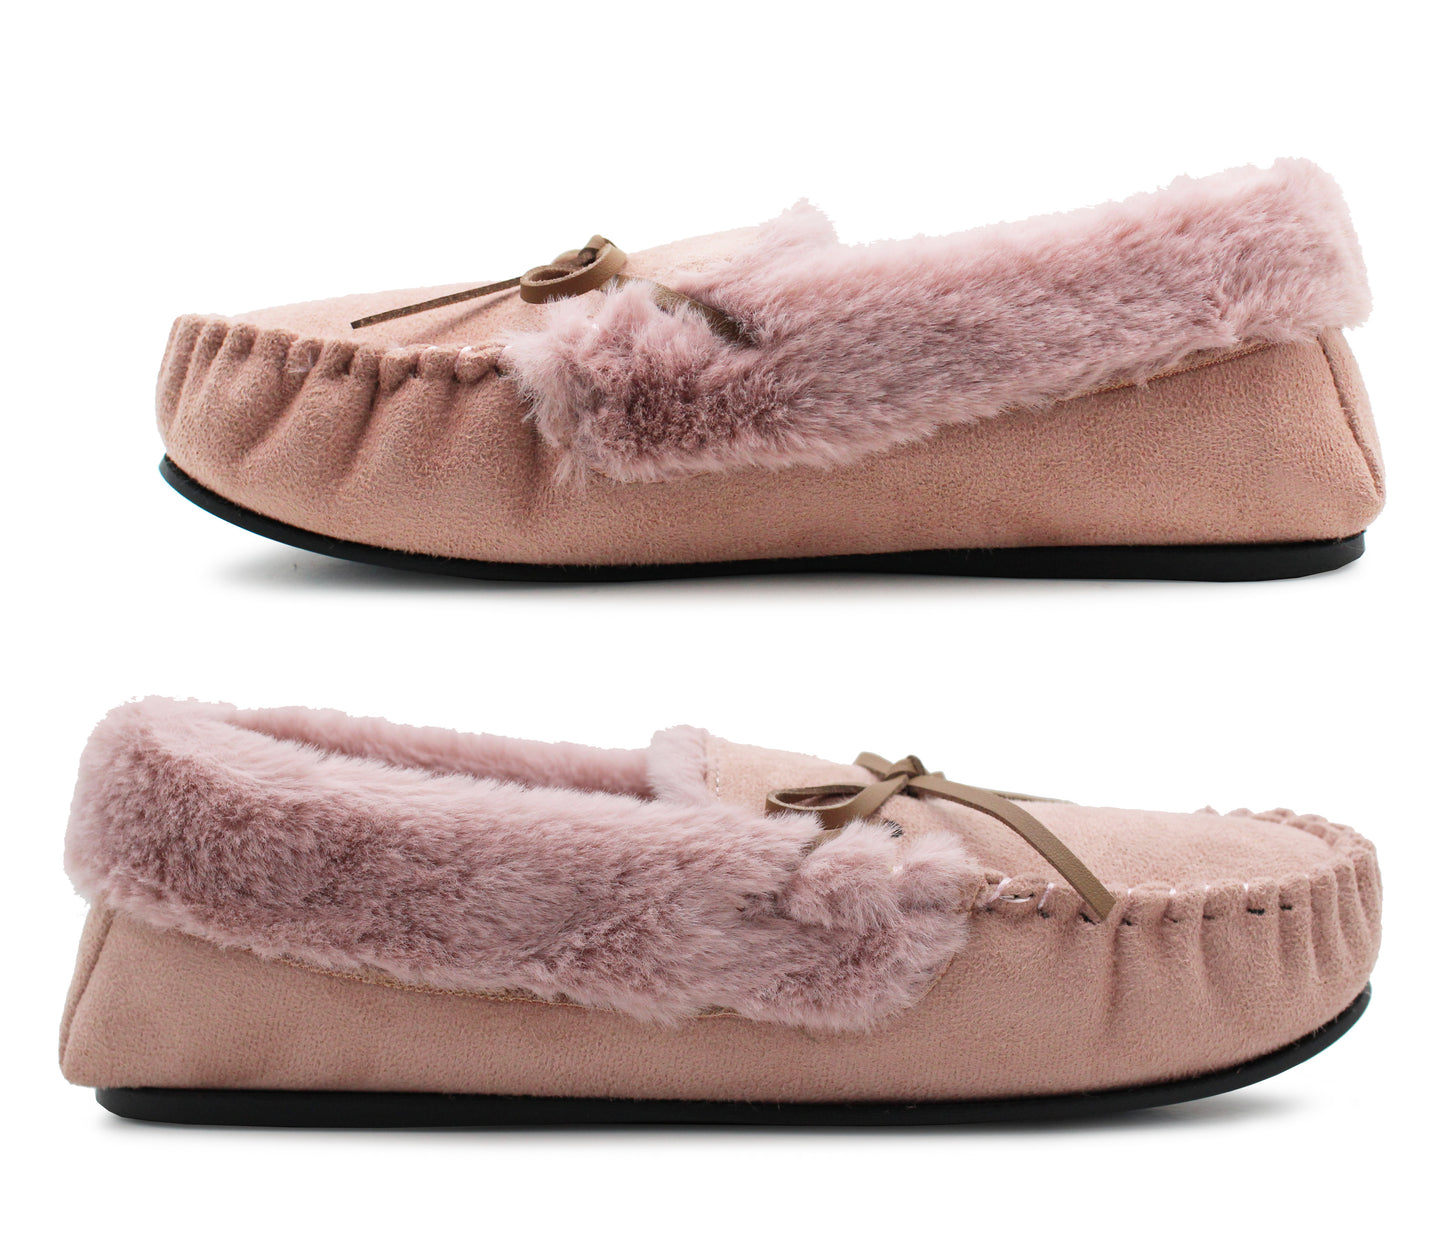 Womens Pink Faux Fur Lined Moccasins Indoor Winter Loafer House Shoes Moc Slippers